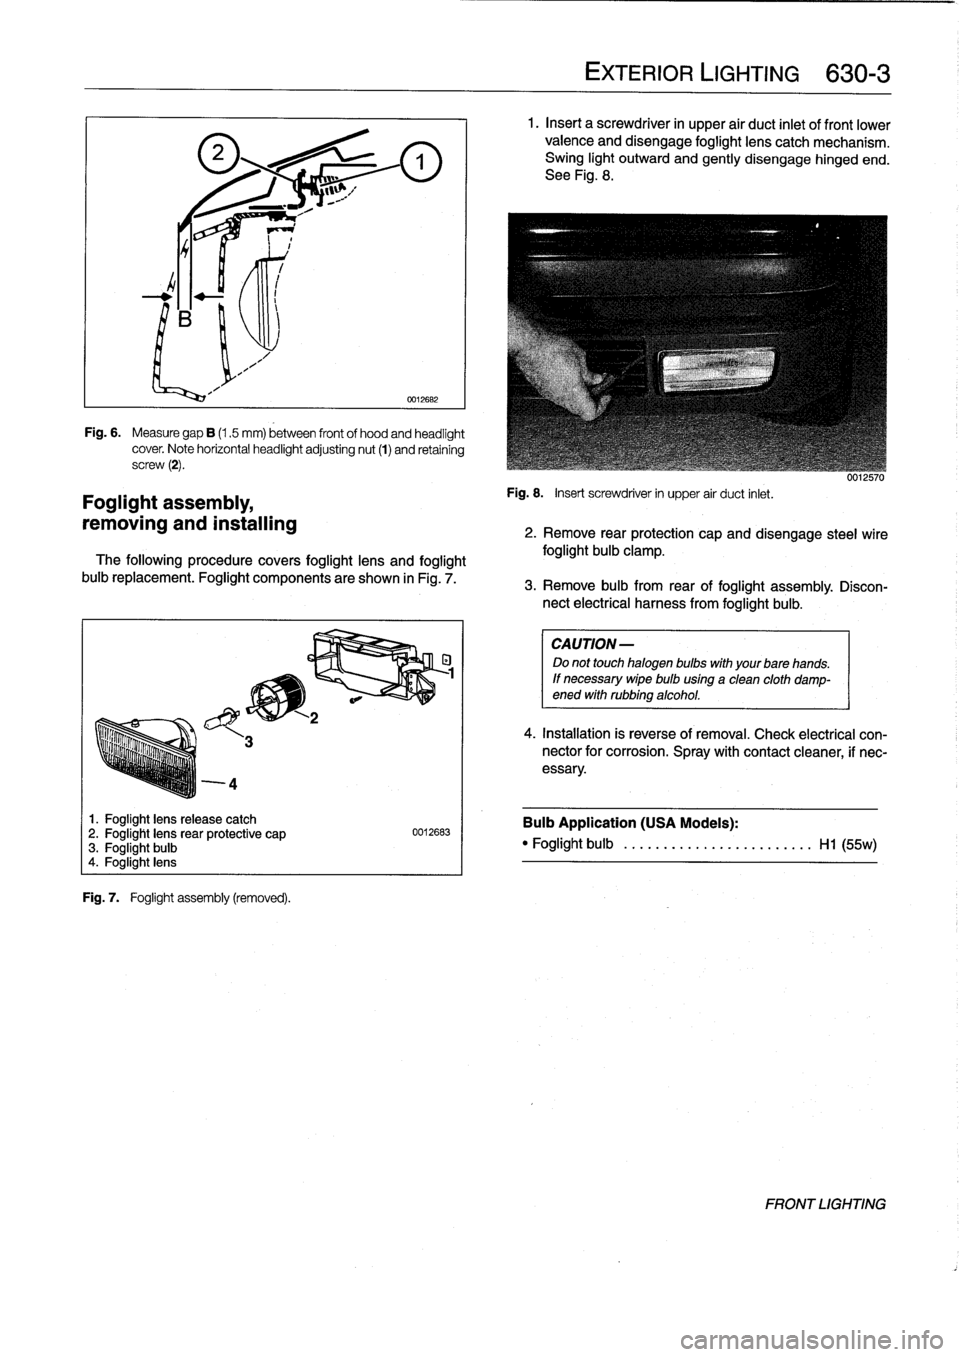 BMW 323i 1997 E36 Workshop Manual 4

Foglight
assembly,

removing
and
installing

1
.
Foglight
lens
release
catch
2
.
Foglight
lensrear
protective
cap
3
.
Foglight
bulb
4
.
Foglight
lens

Fig
.
7
.

	

Foglight
assembly
(removed)
.

0